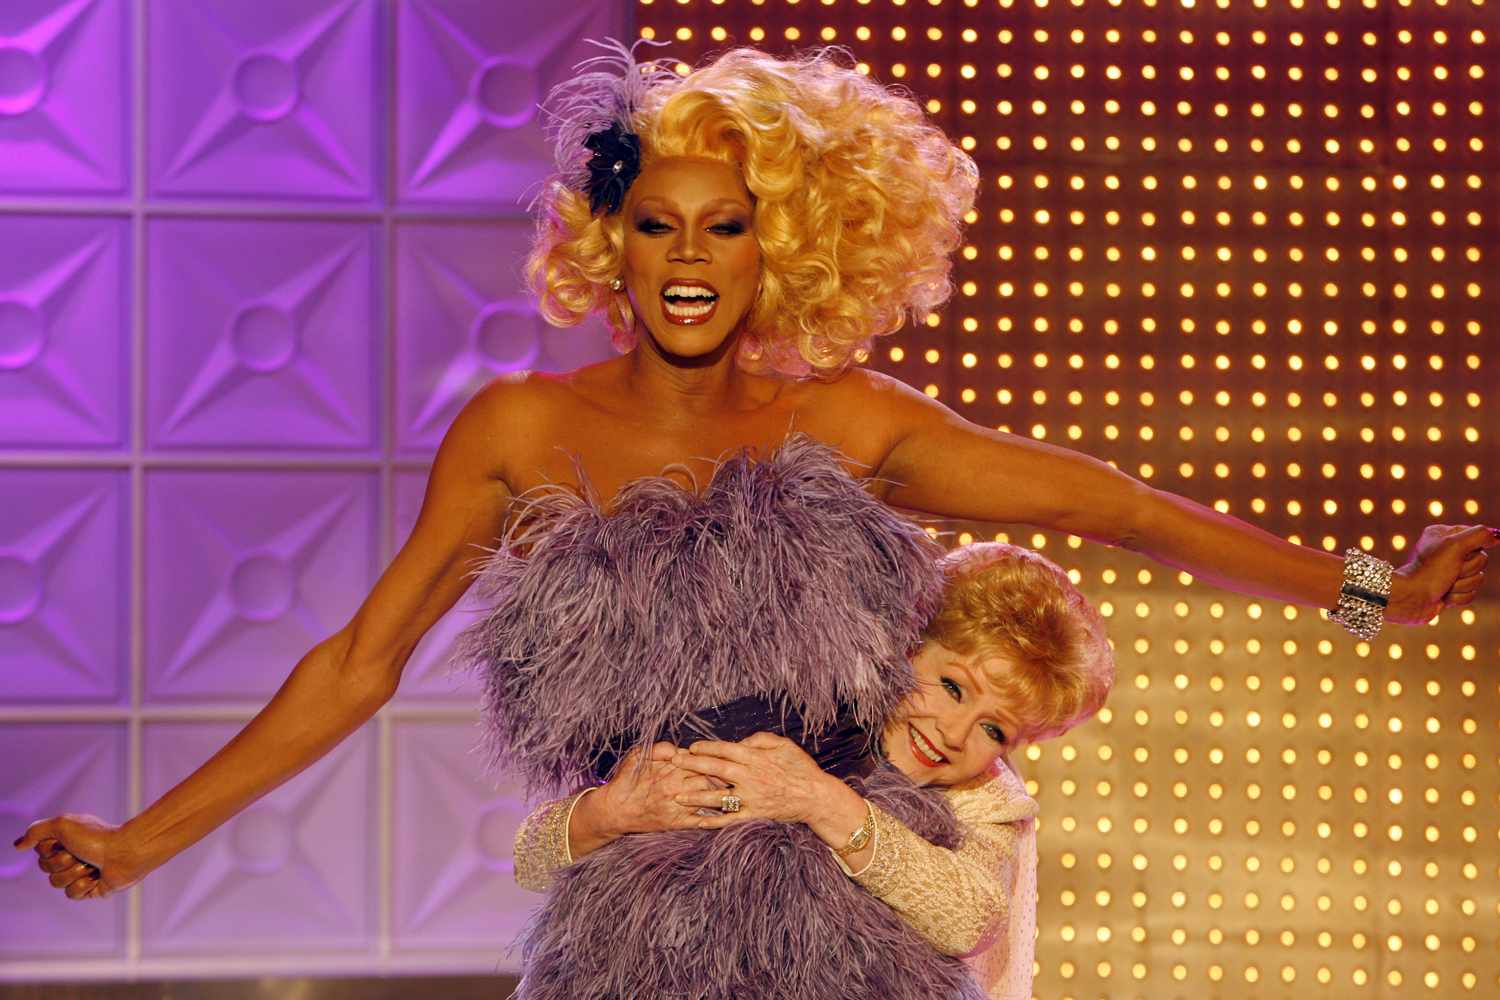 Debbie Reynolds gives a very tall RuPaul a hug during the taping of their episode together on RuPaul's Drag Race